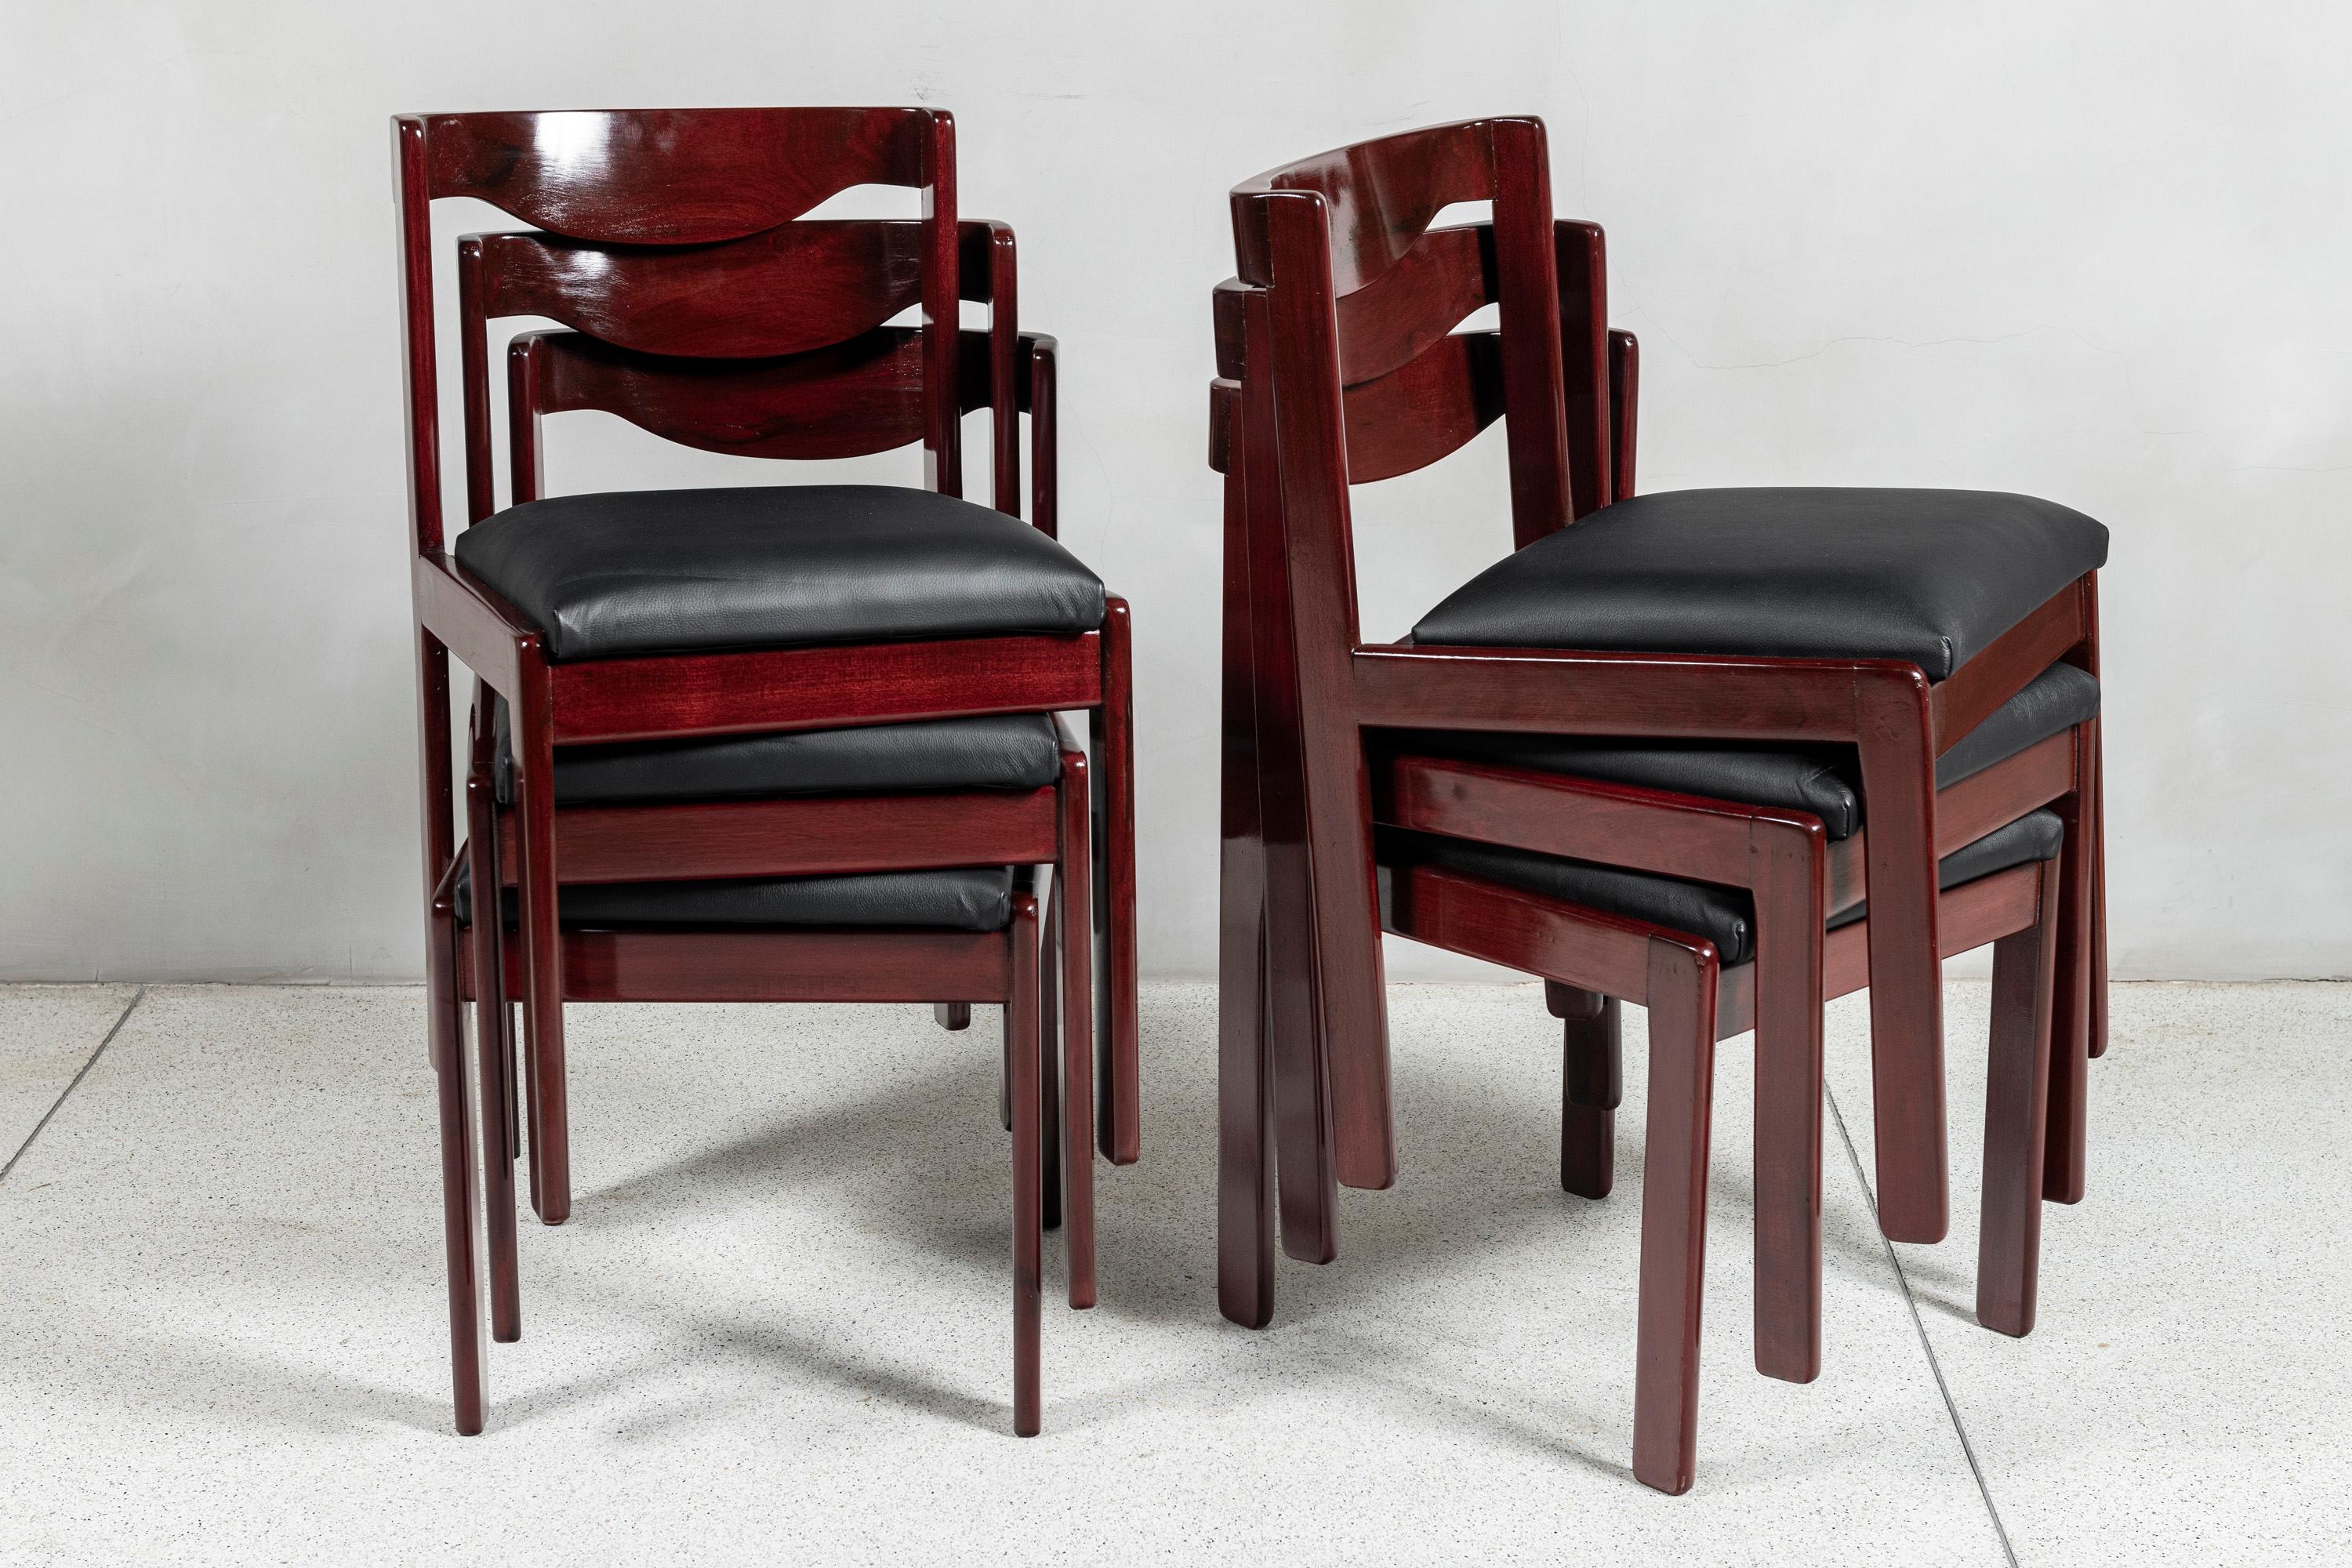 Wood and leather set of 6 LP stackable chairs designed by Ricardo Blanco, Argentina, 1970.